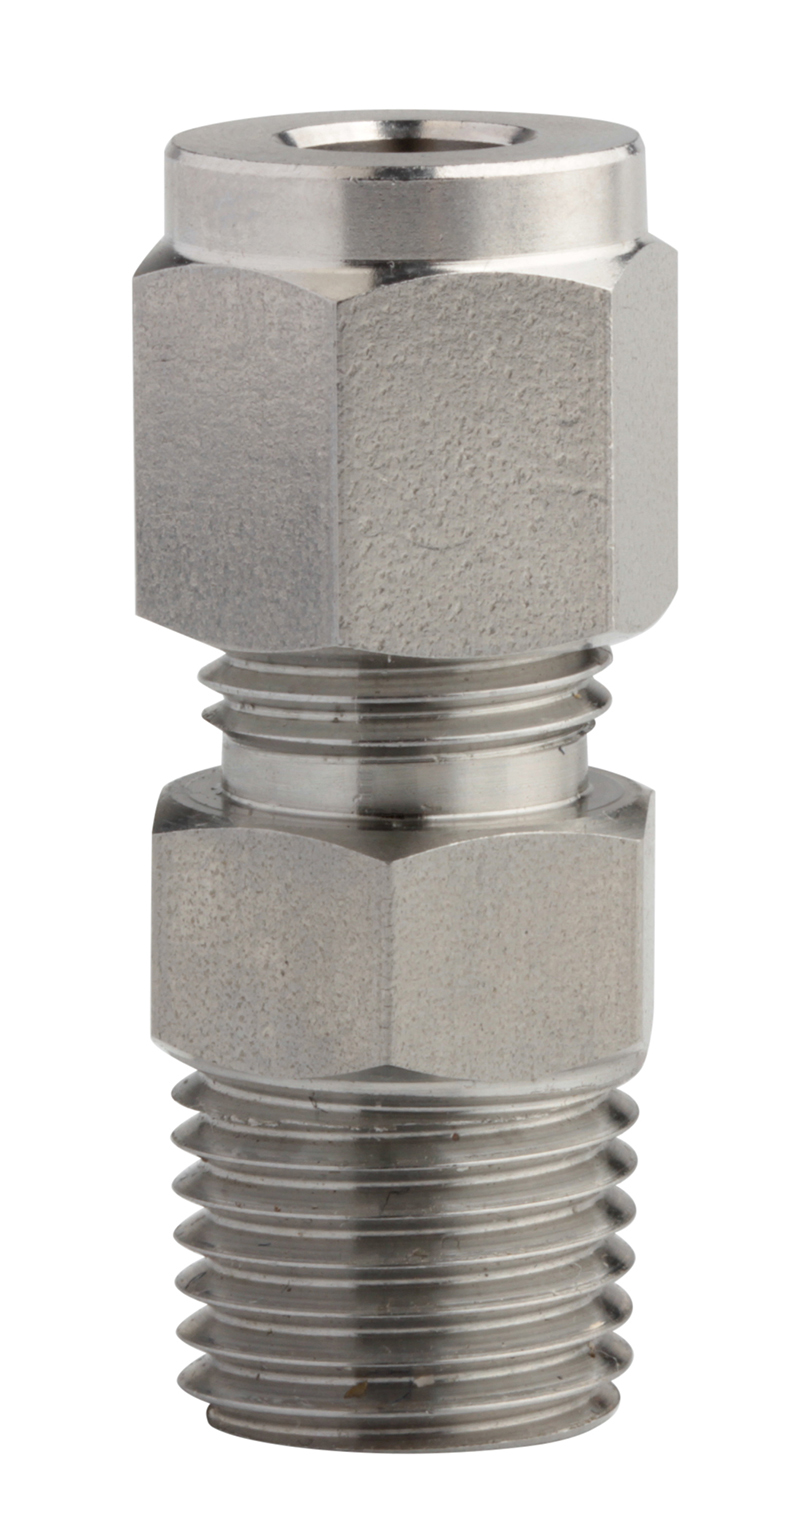 Pneumatic SS316L Stainless Steel Male Straight SSUPC Quick Connector Compression Fittings